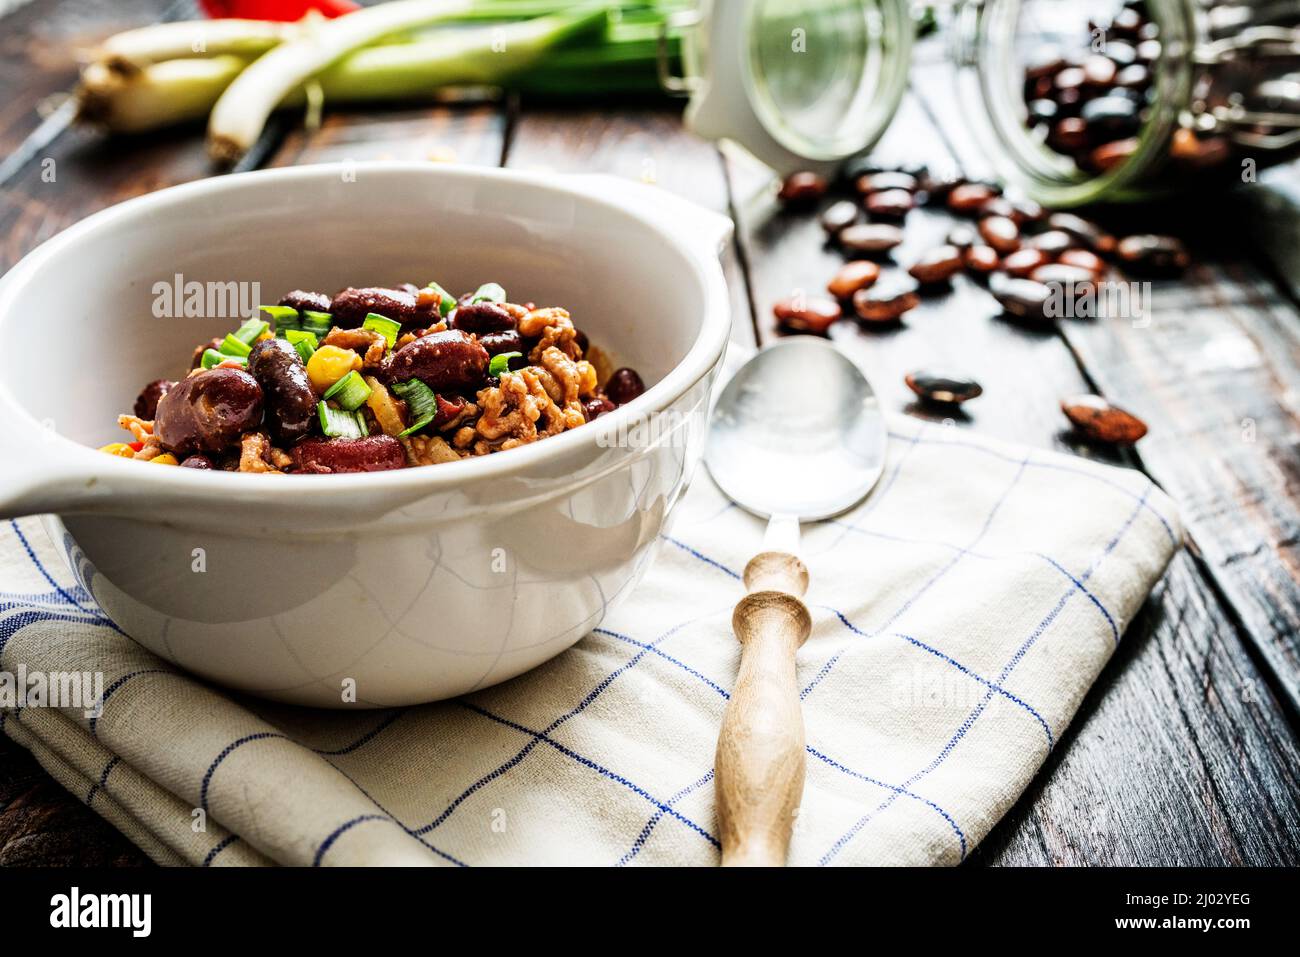 Mexican chili or chilli con carne. Cooked kidney bean, minced meat, chili, corn and pepper in pan  on wood table Stock Photo